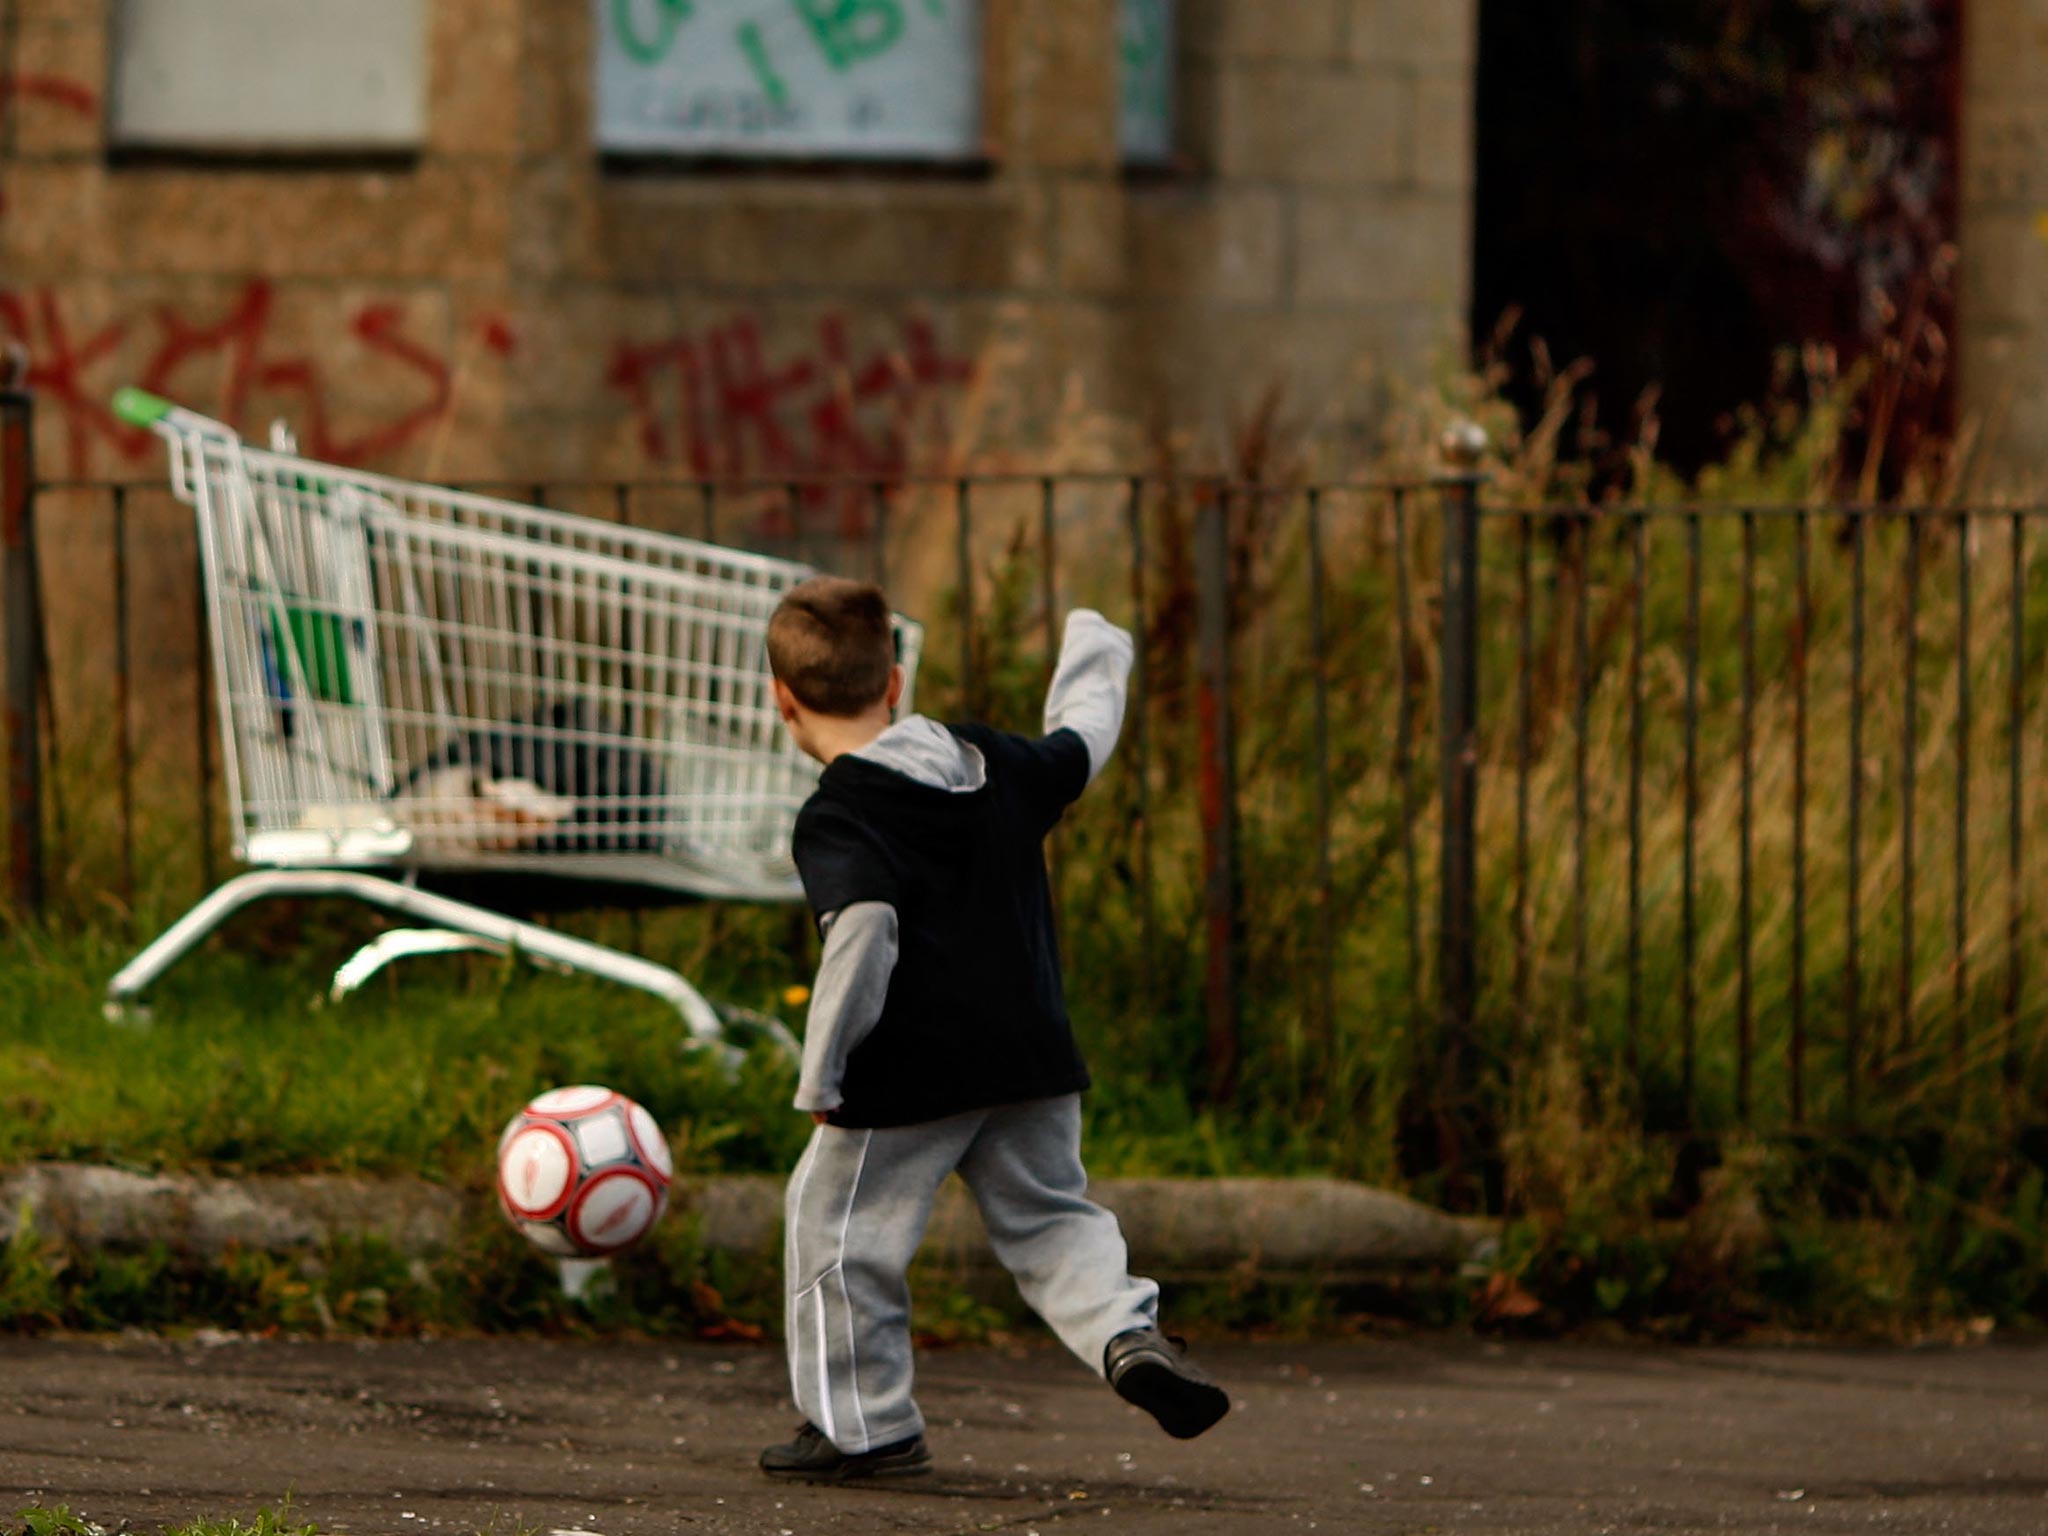 The number of children in relative income poverty is currently 2.3 million in the UK